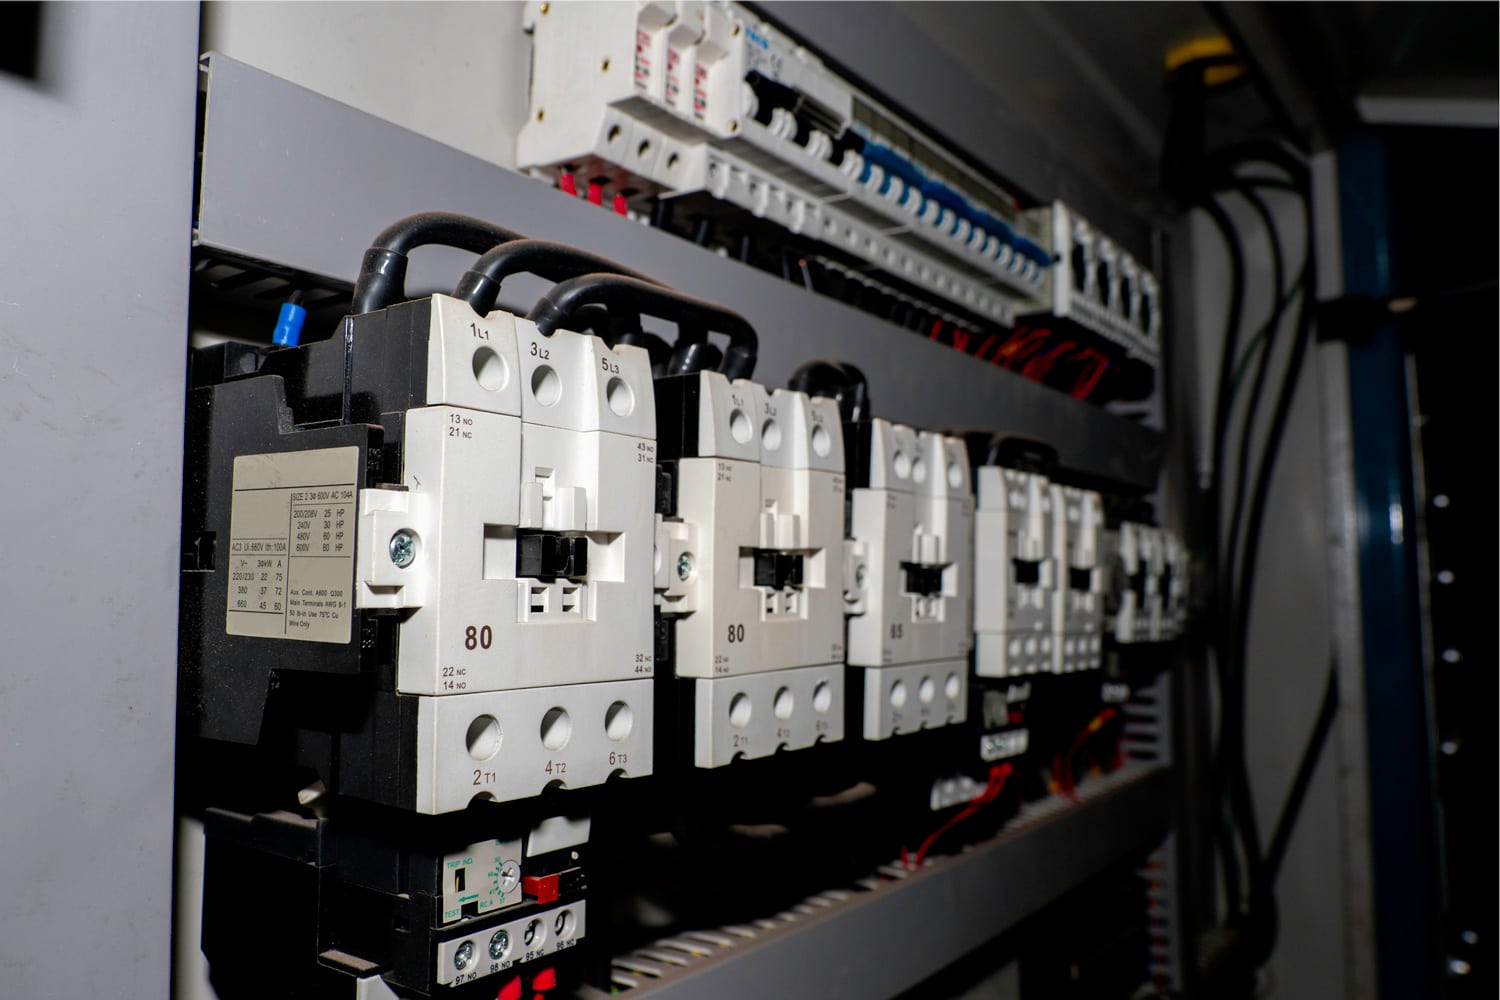 Voltage switchboard with circuit breakers. Electrical background